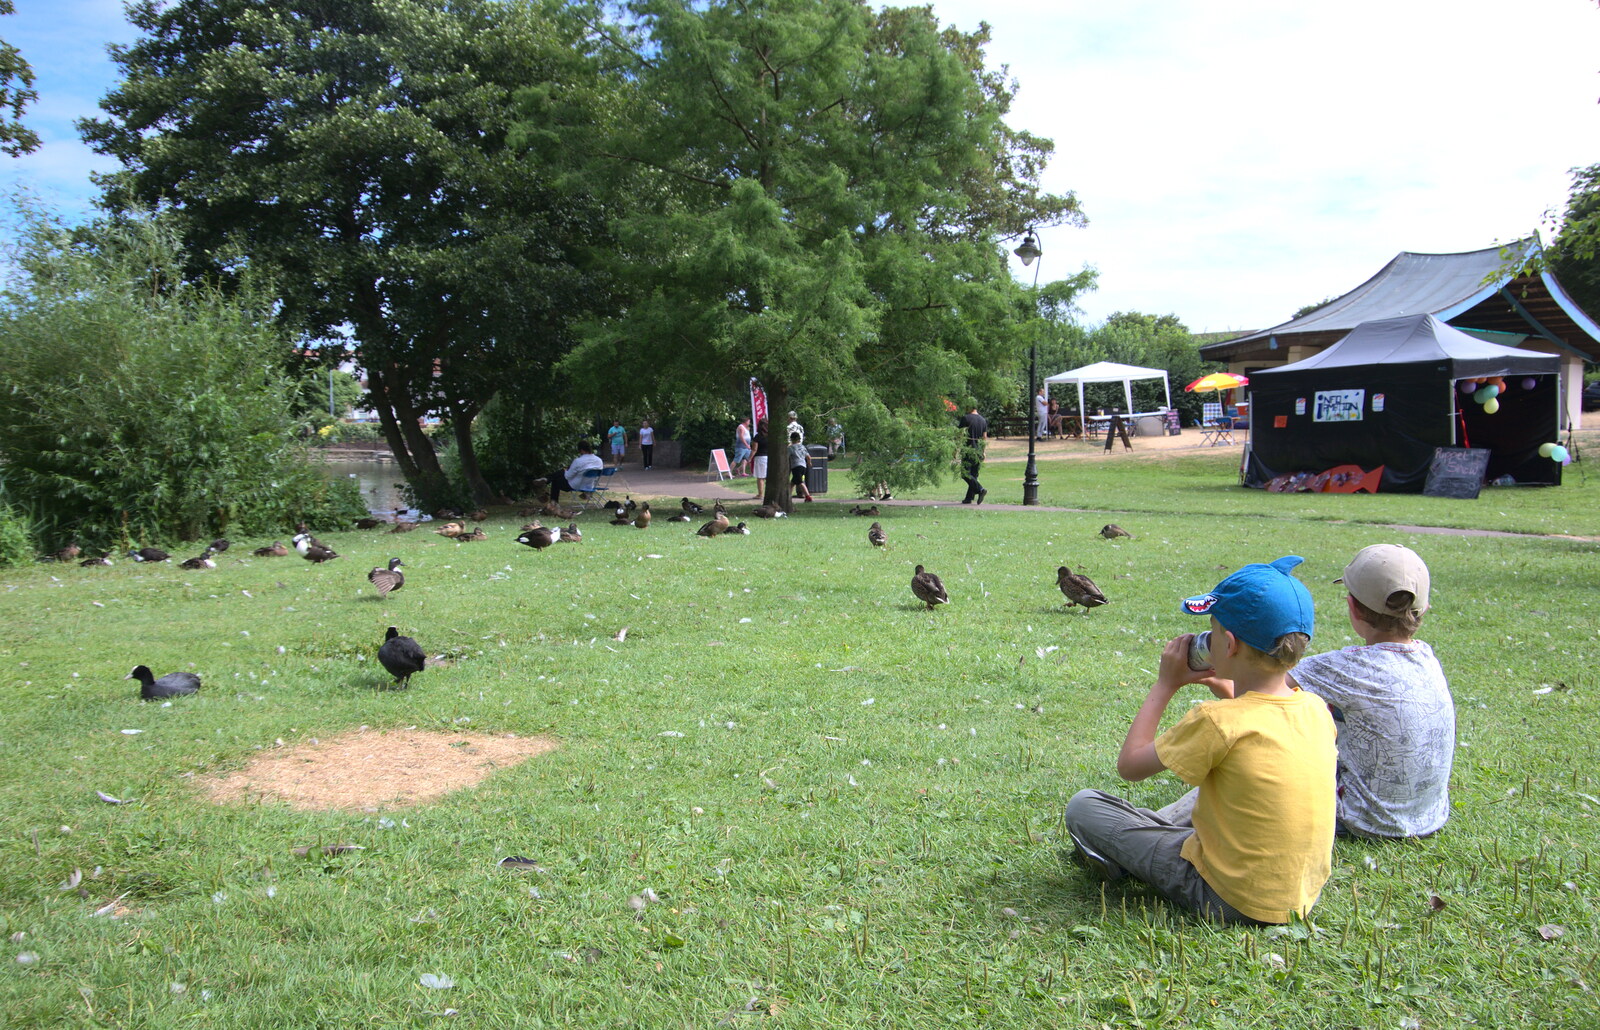 The boys sit with the ducks from Diss Fest, The Park, Diss, Norfolk - 22nd July 2018